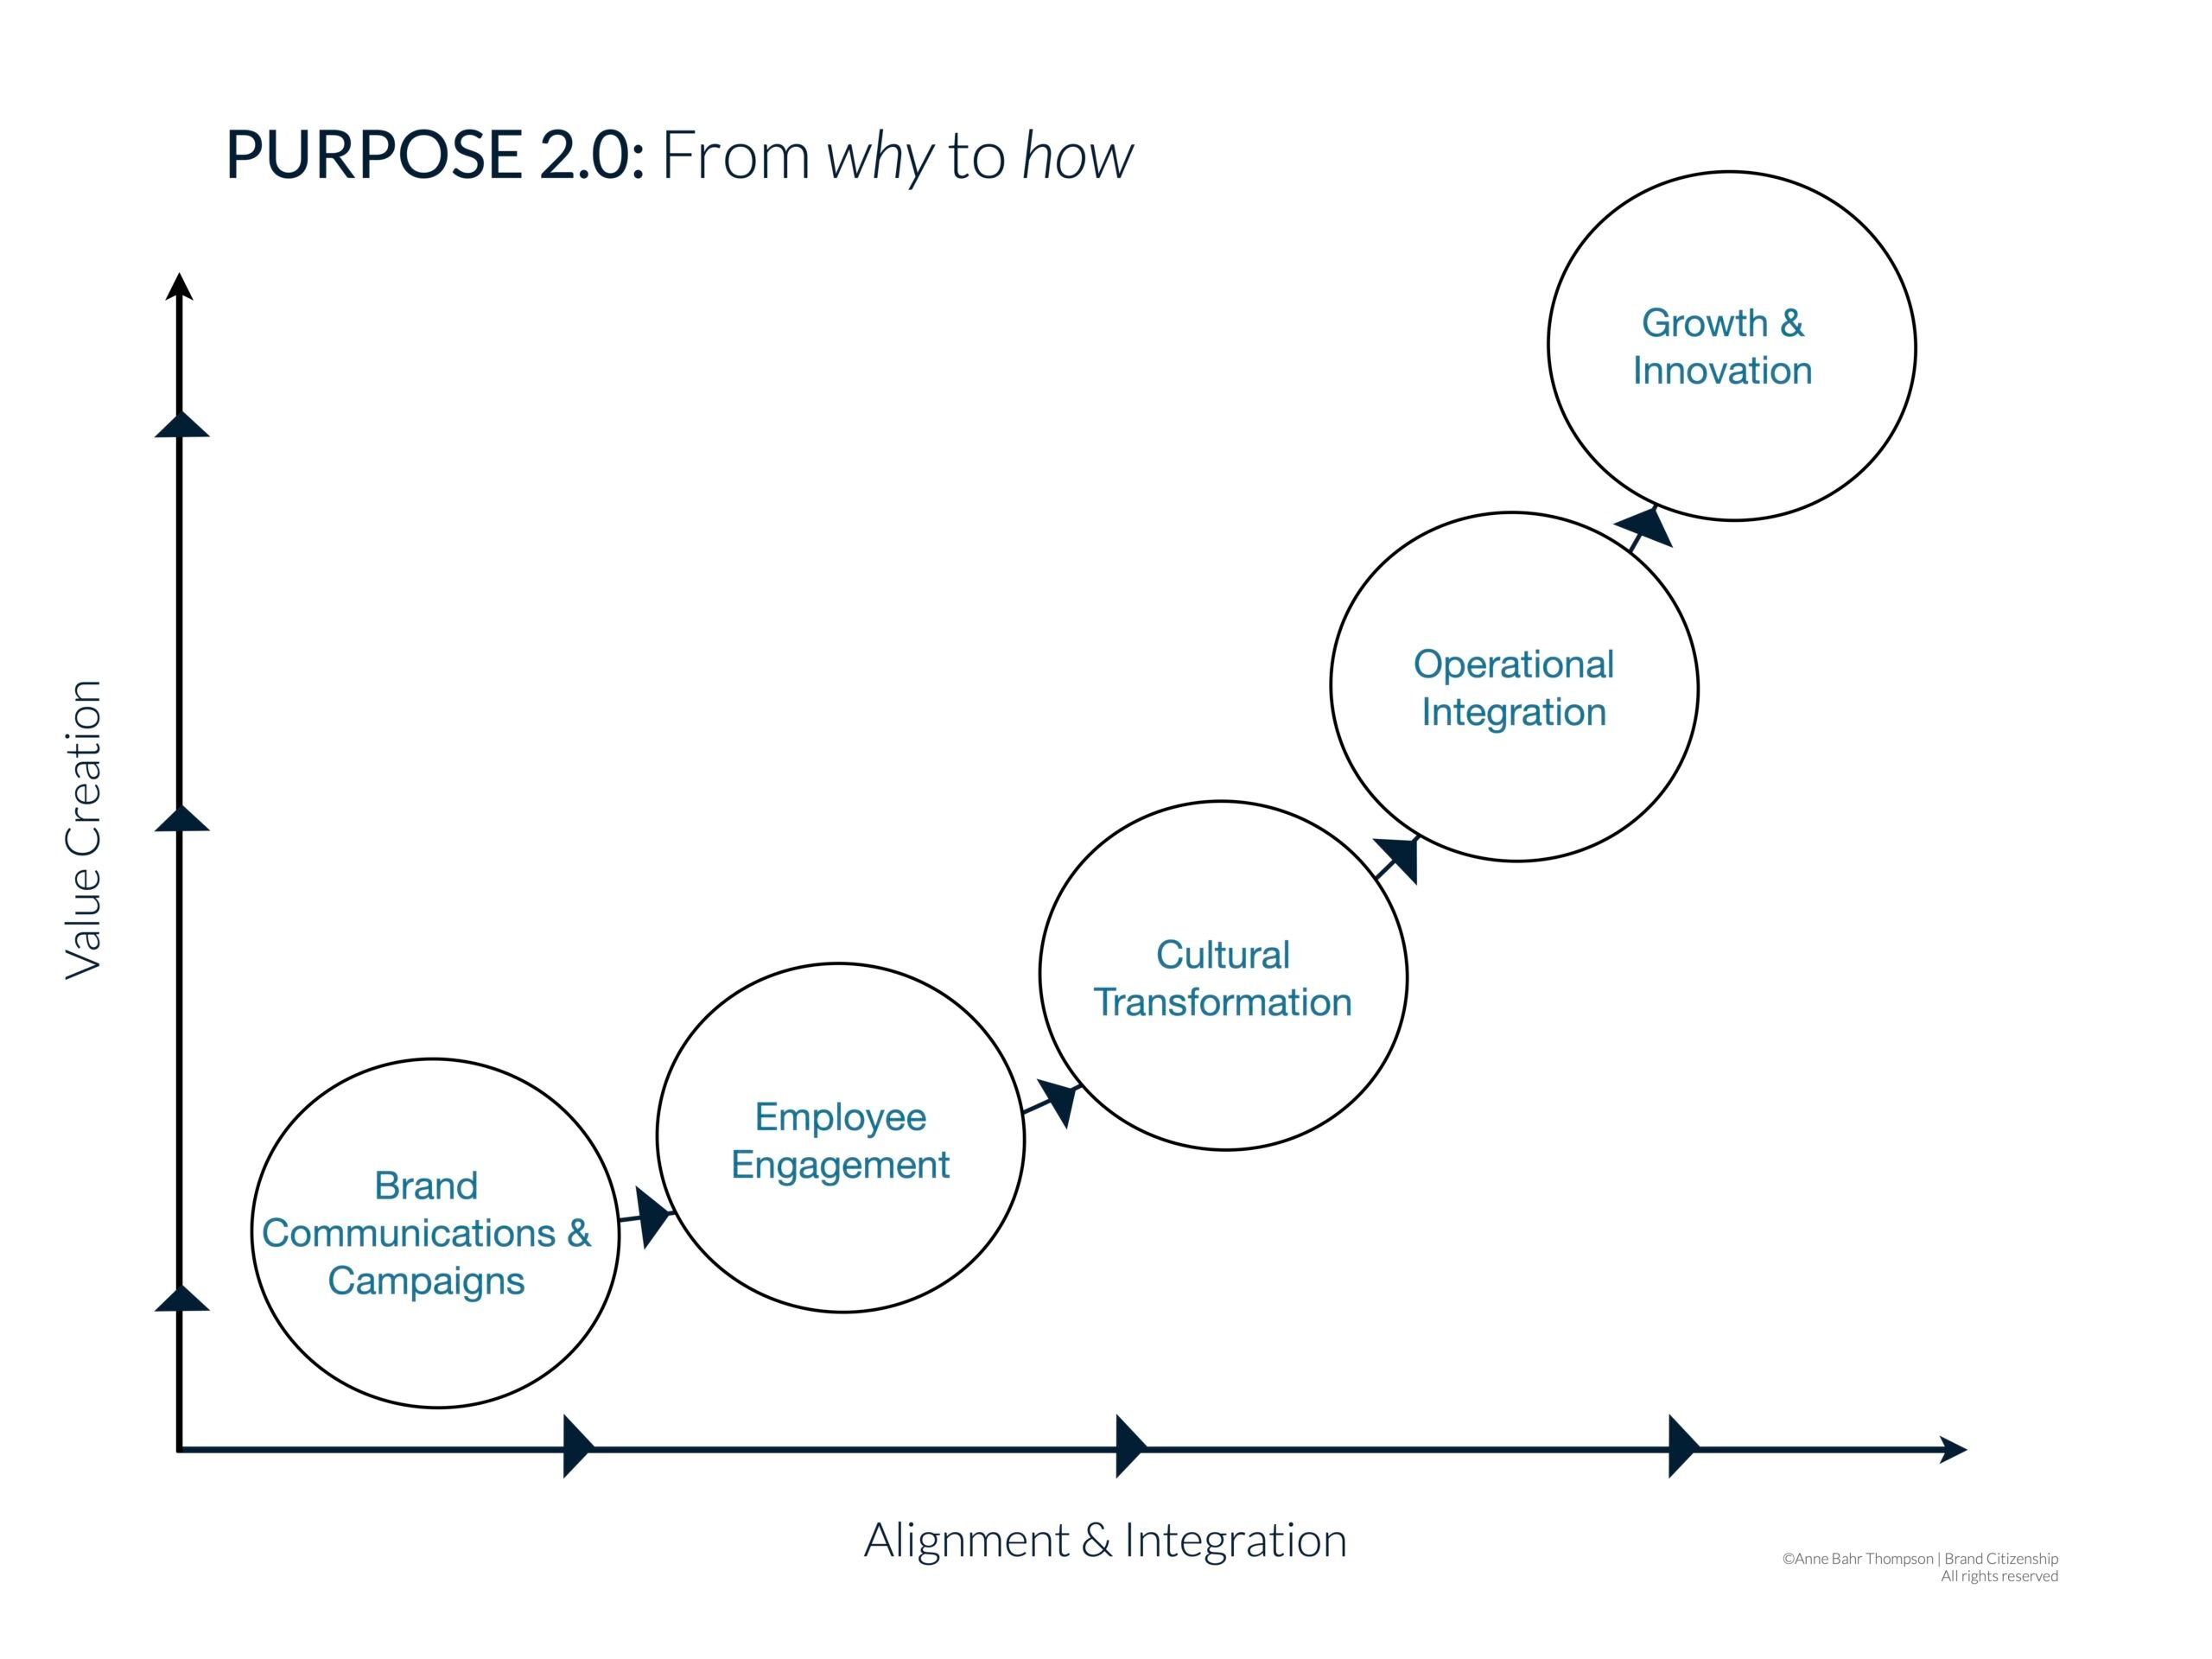 The Rise of Purpose 2.0